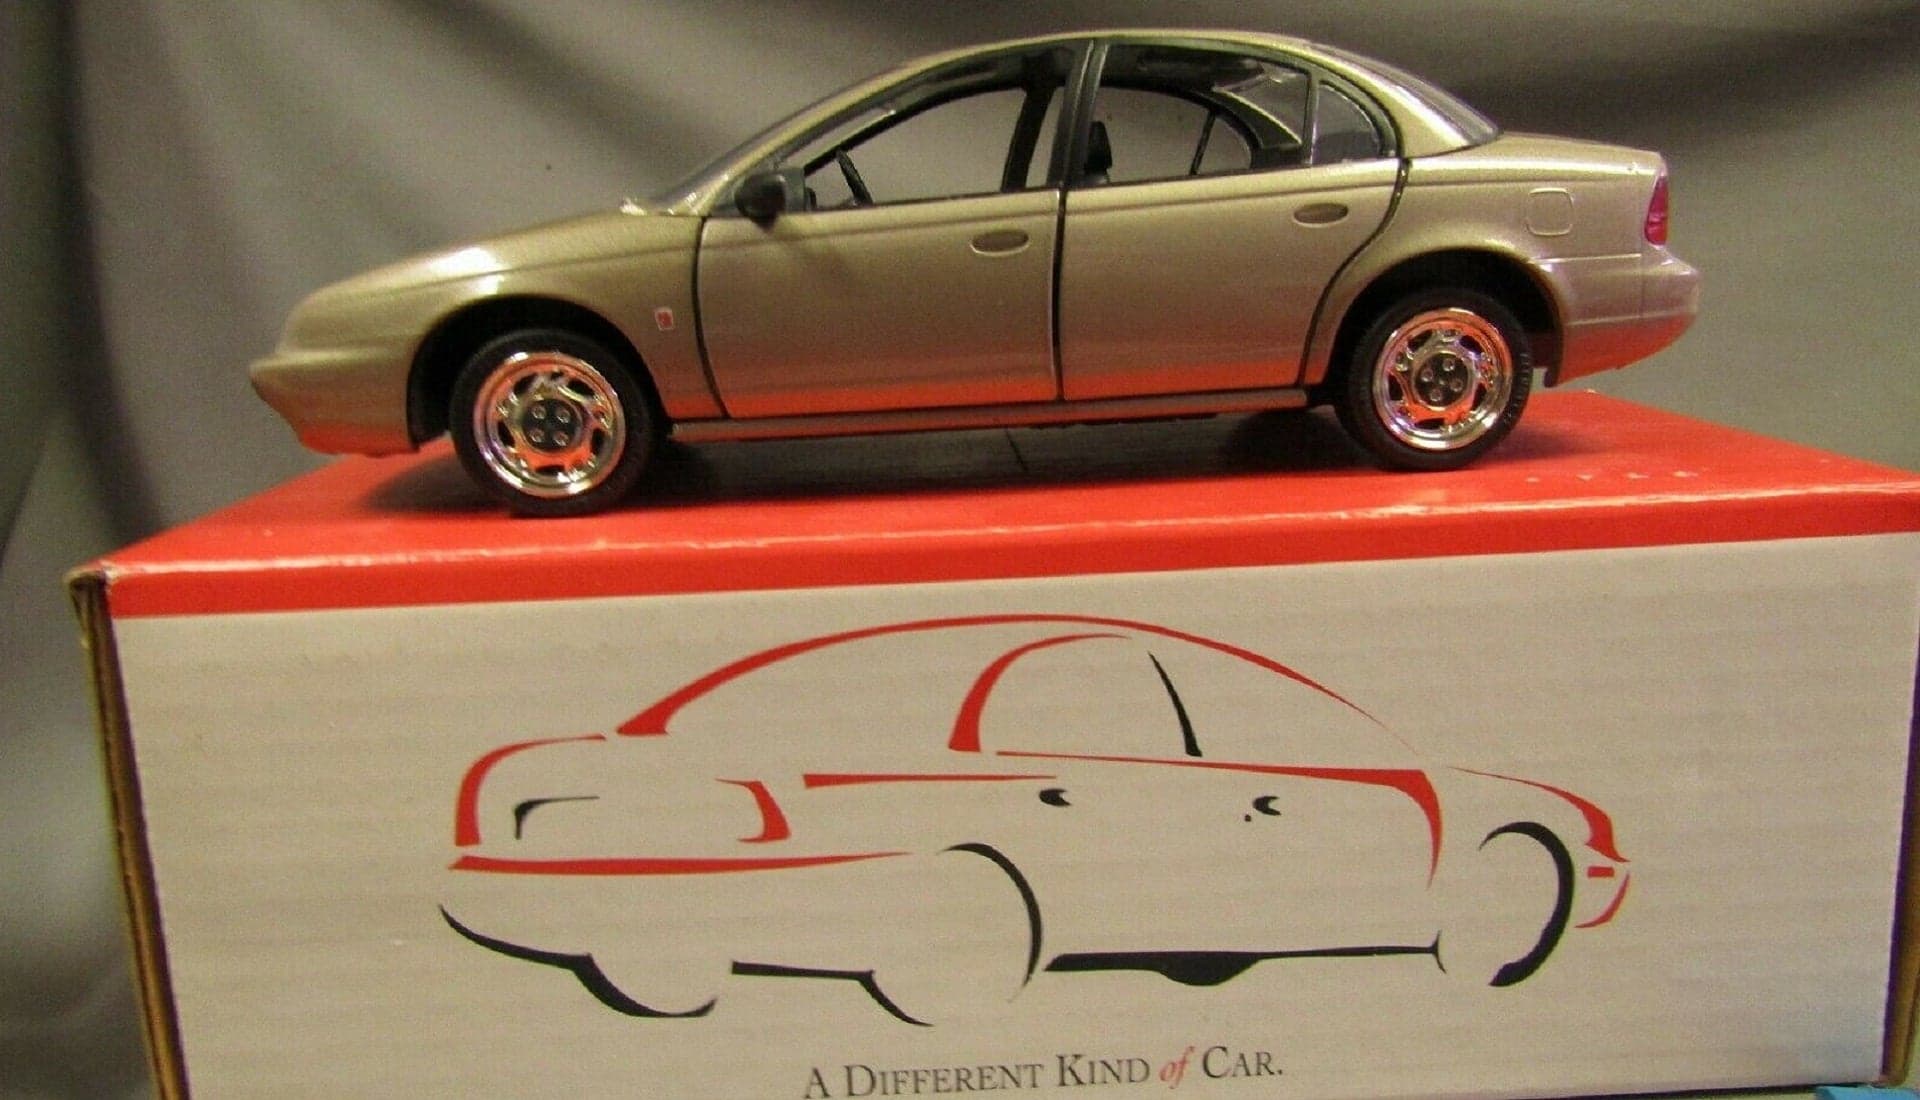 Bless the Hero Who Spent $580 on This Rare Saturn SL ‘Limited Edition’ Diecast